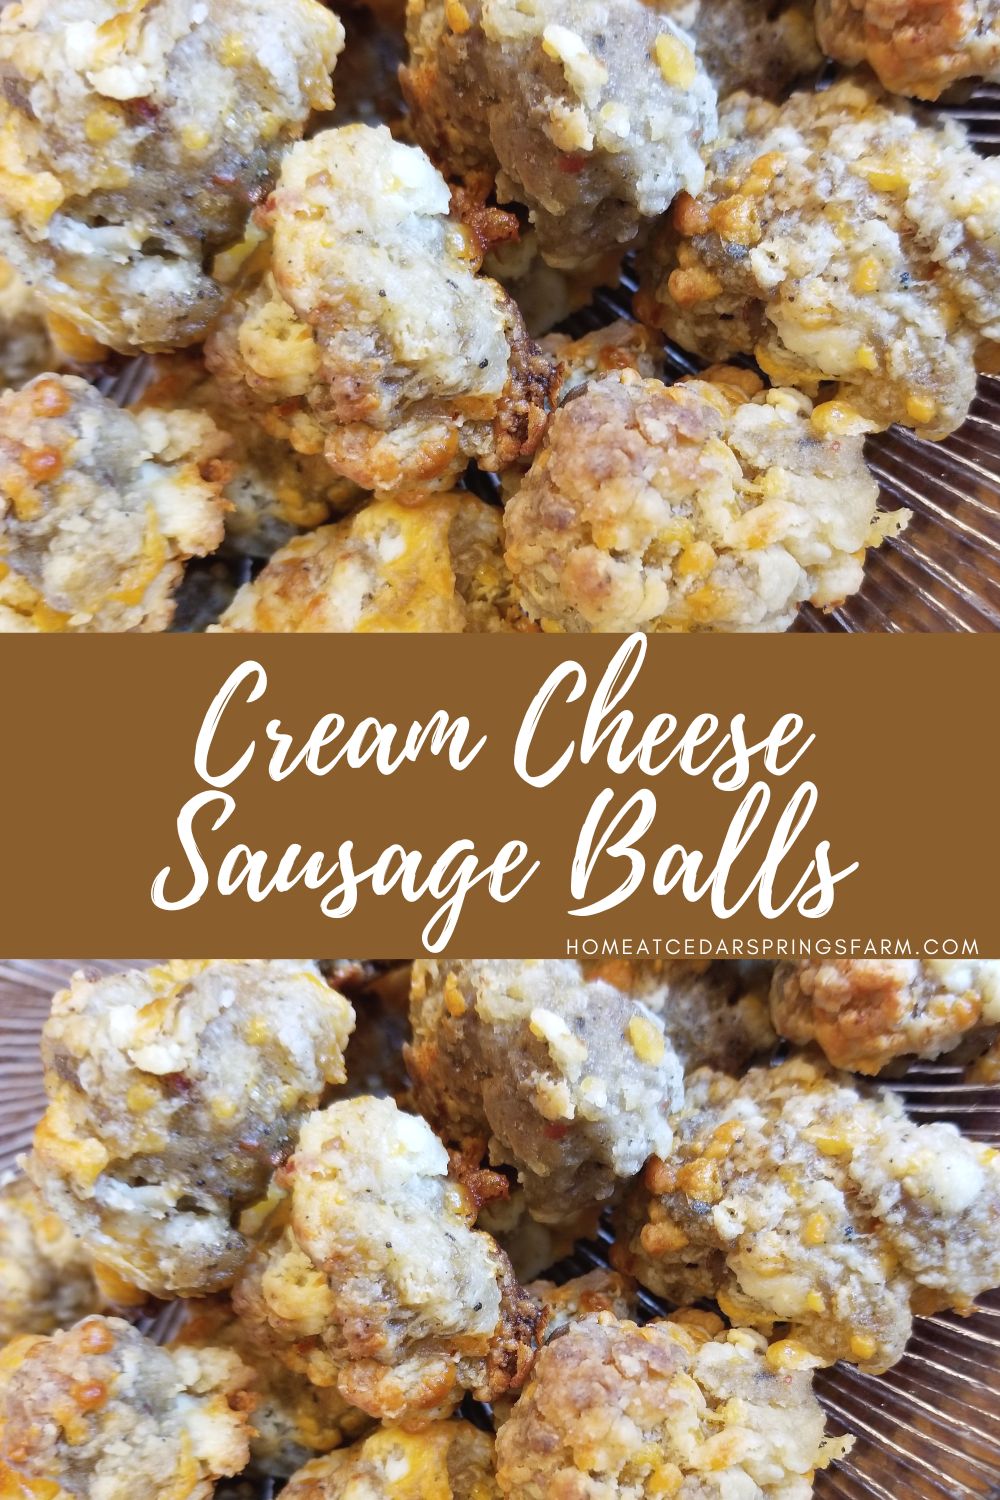 Cream cheese sausage balls on a plate with text overlay.